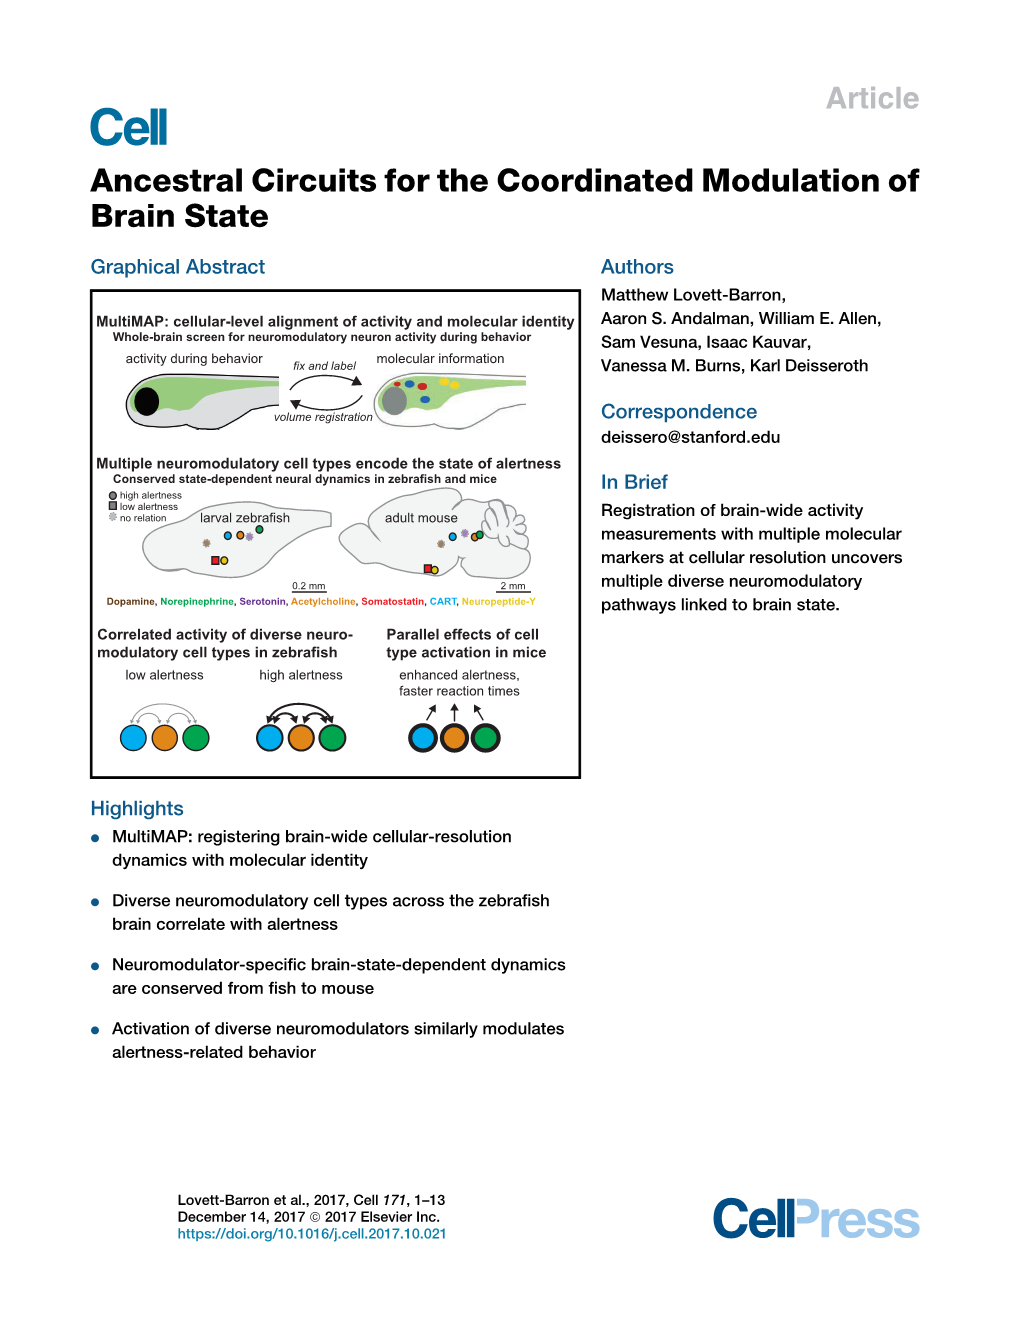 Ancestral Circuits for the Coordinated Modulation of Brain State